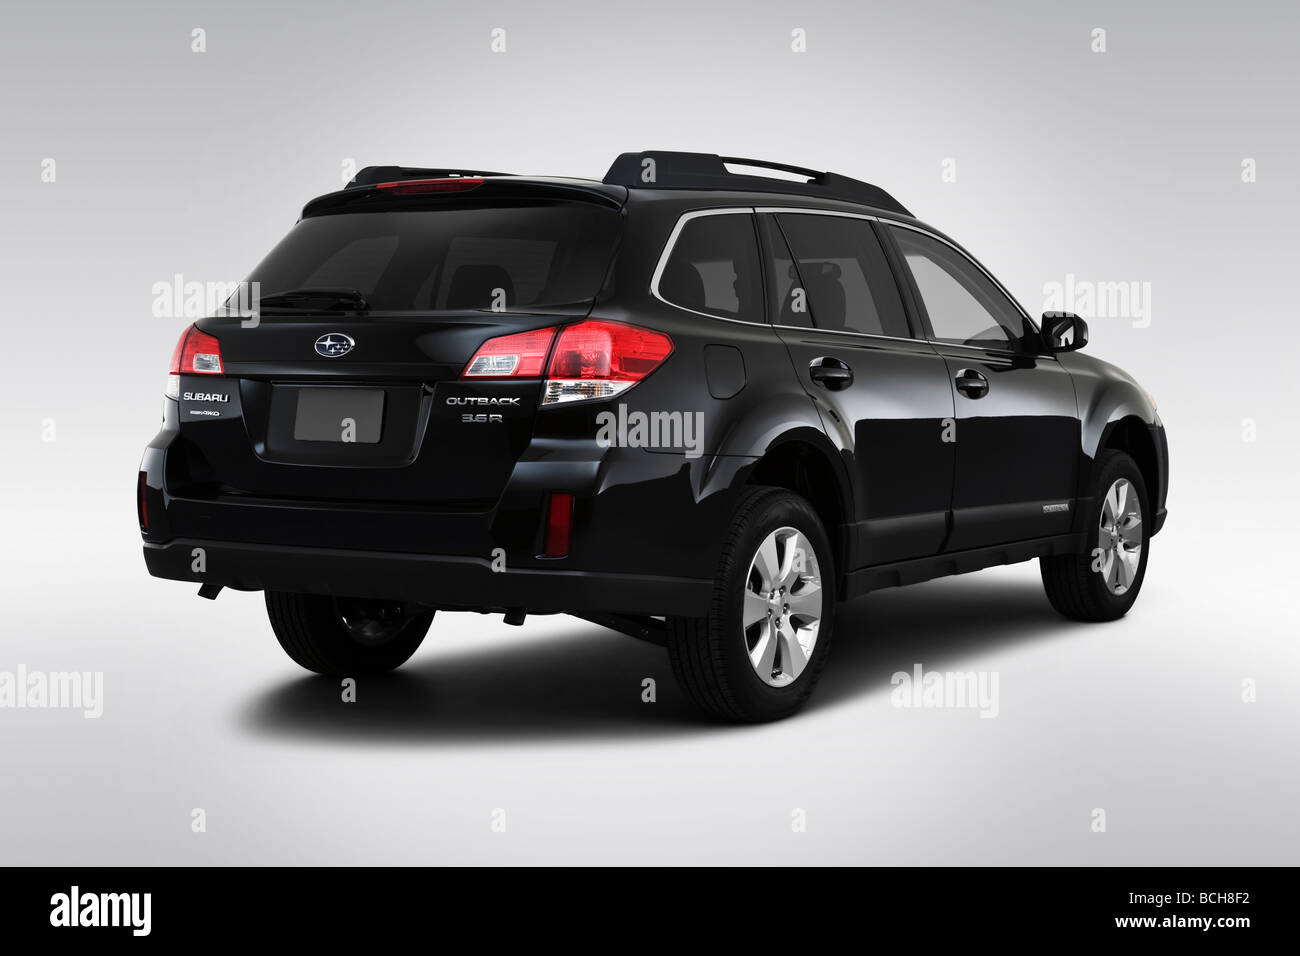 2010 Subaru Outback 3.6 R in Black - Rear angle view Stock Photo